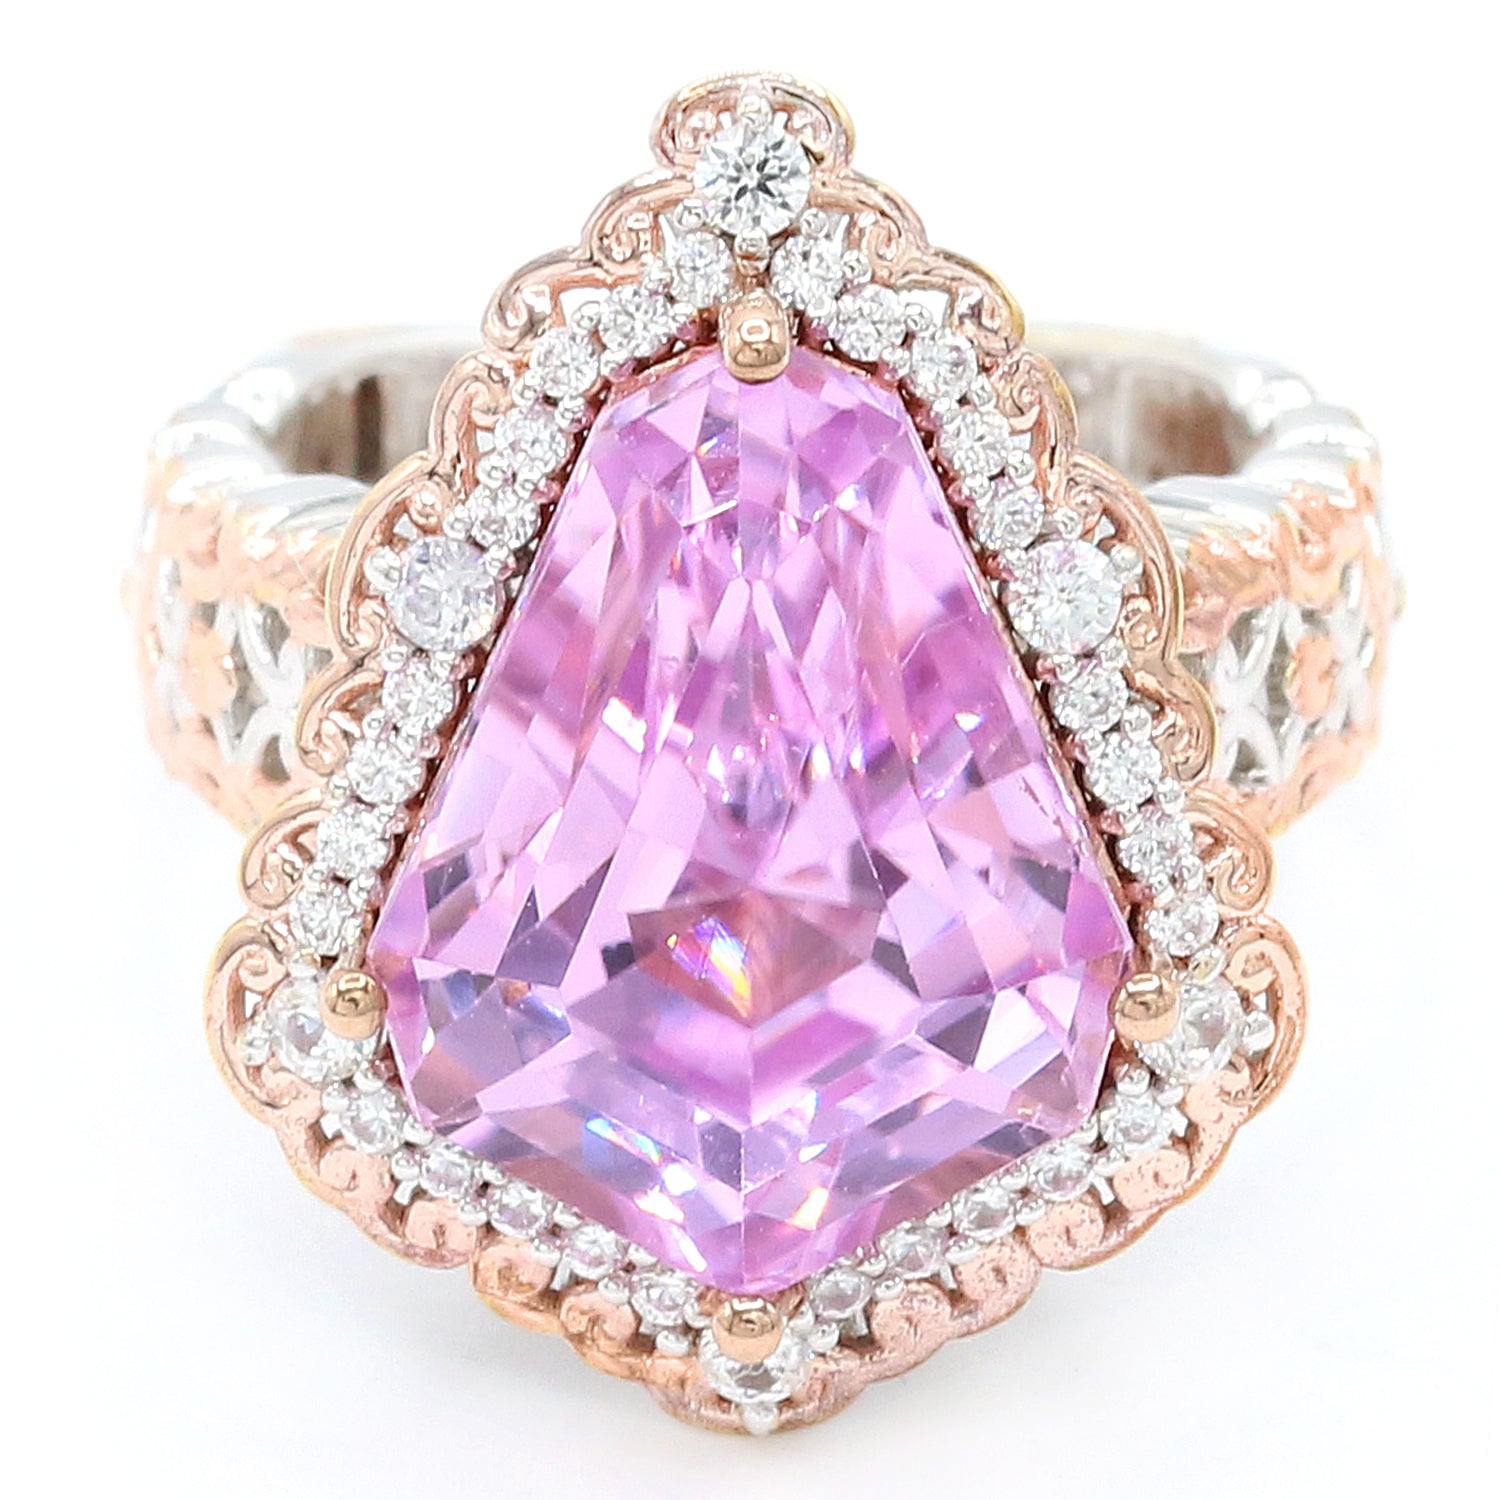 Limited Edition Gems en Vogue Luxe One-of-a-Kind 14.94ctw Shield Cut Kunzite & White Zircon Halo Ring